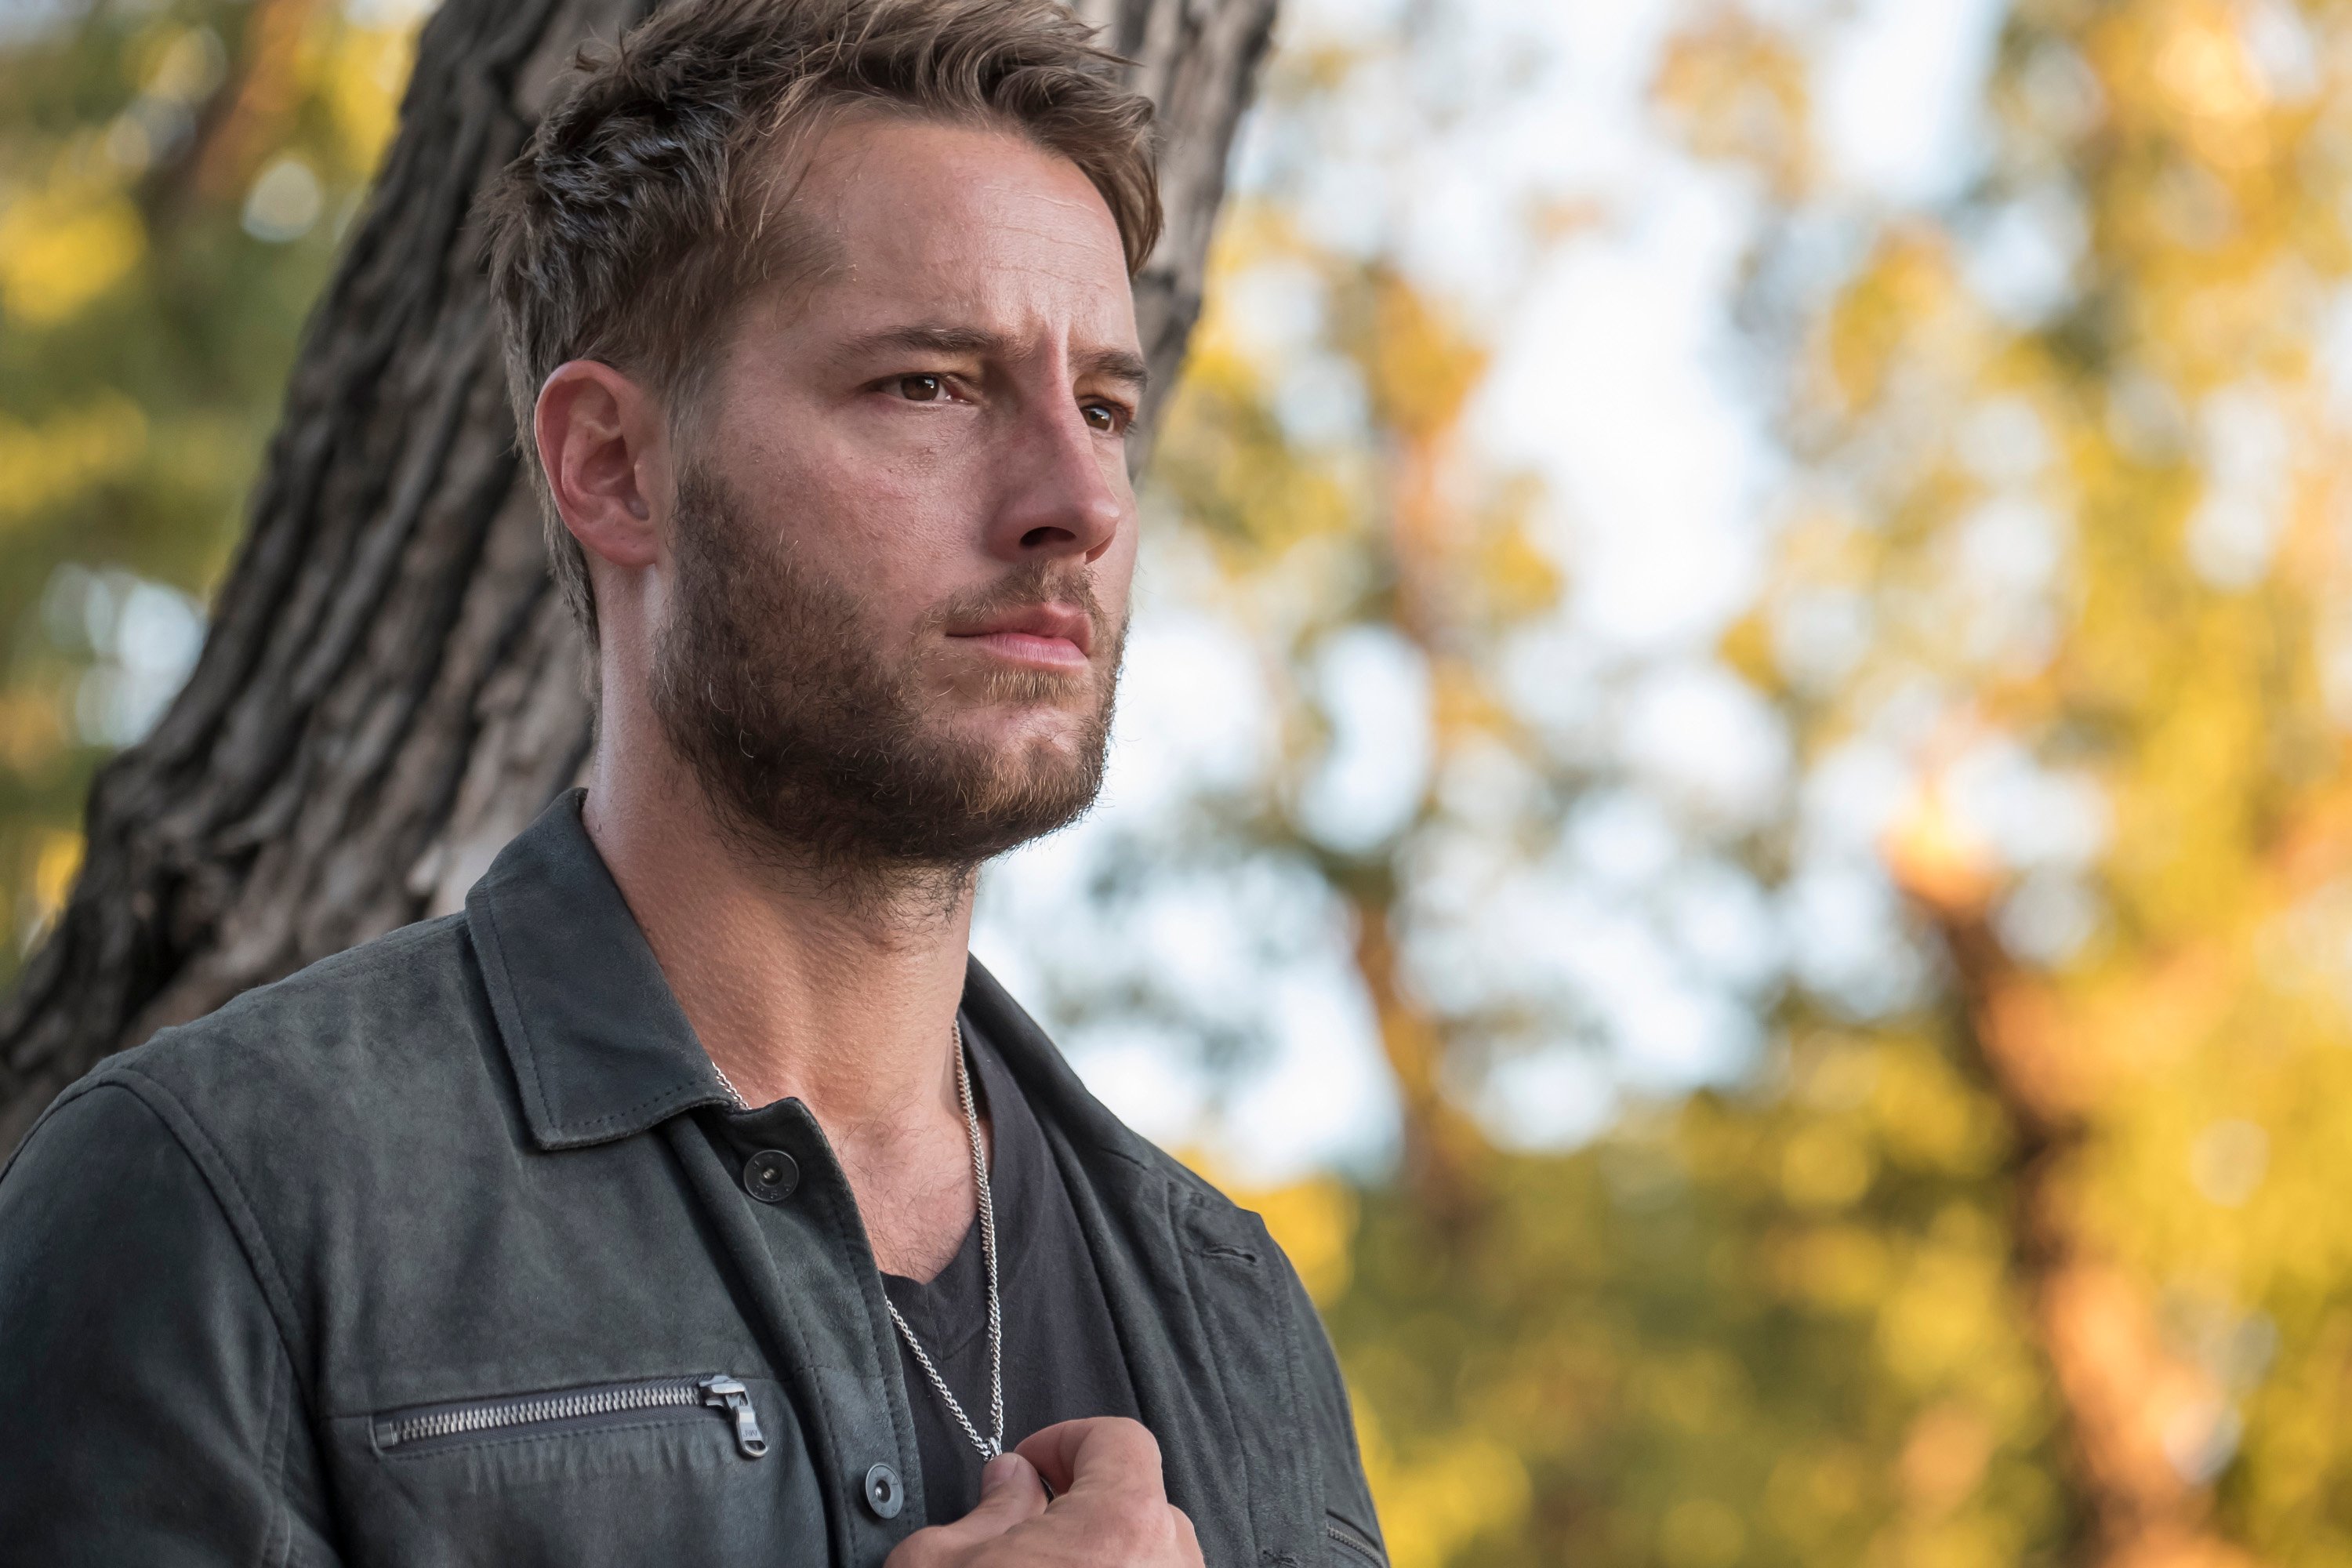 Justin Hartley, in character as Kevin Pearson in 'This Is Us' Season 2, wears a dark gray jacket over a gray shirt and necklace.